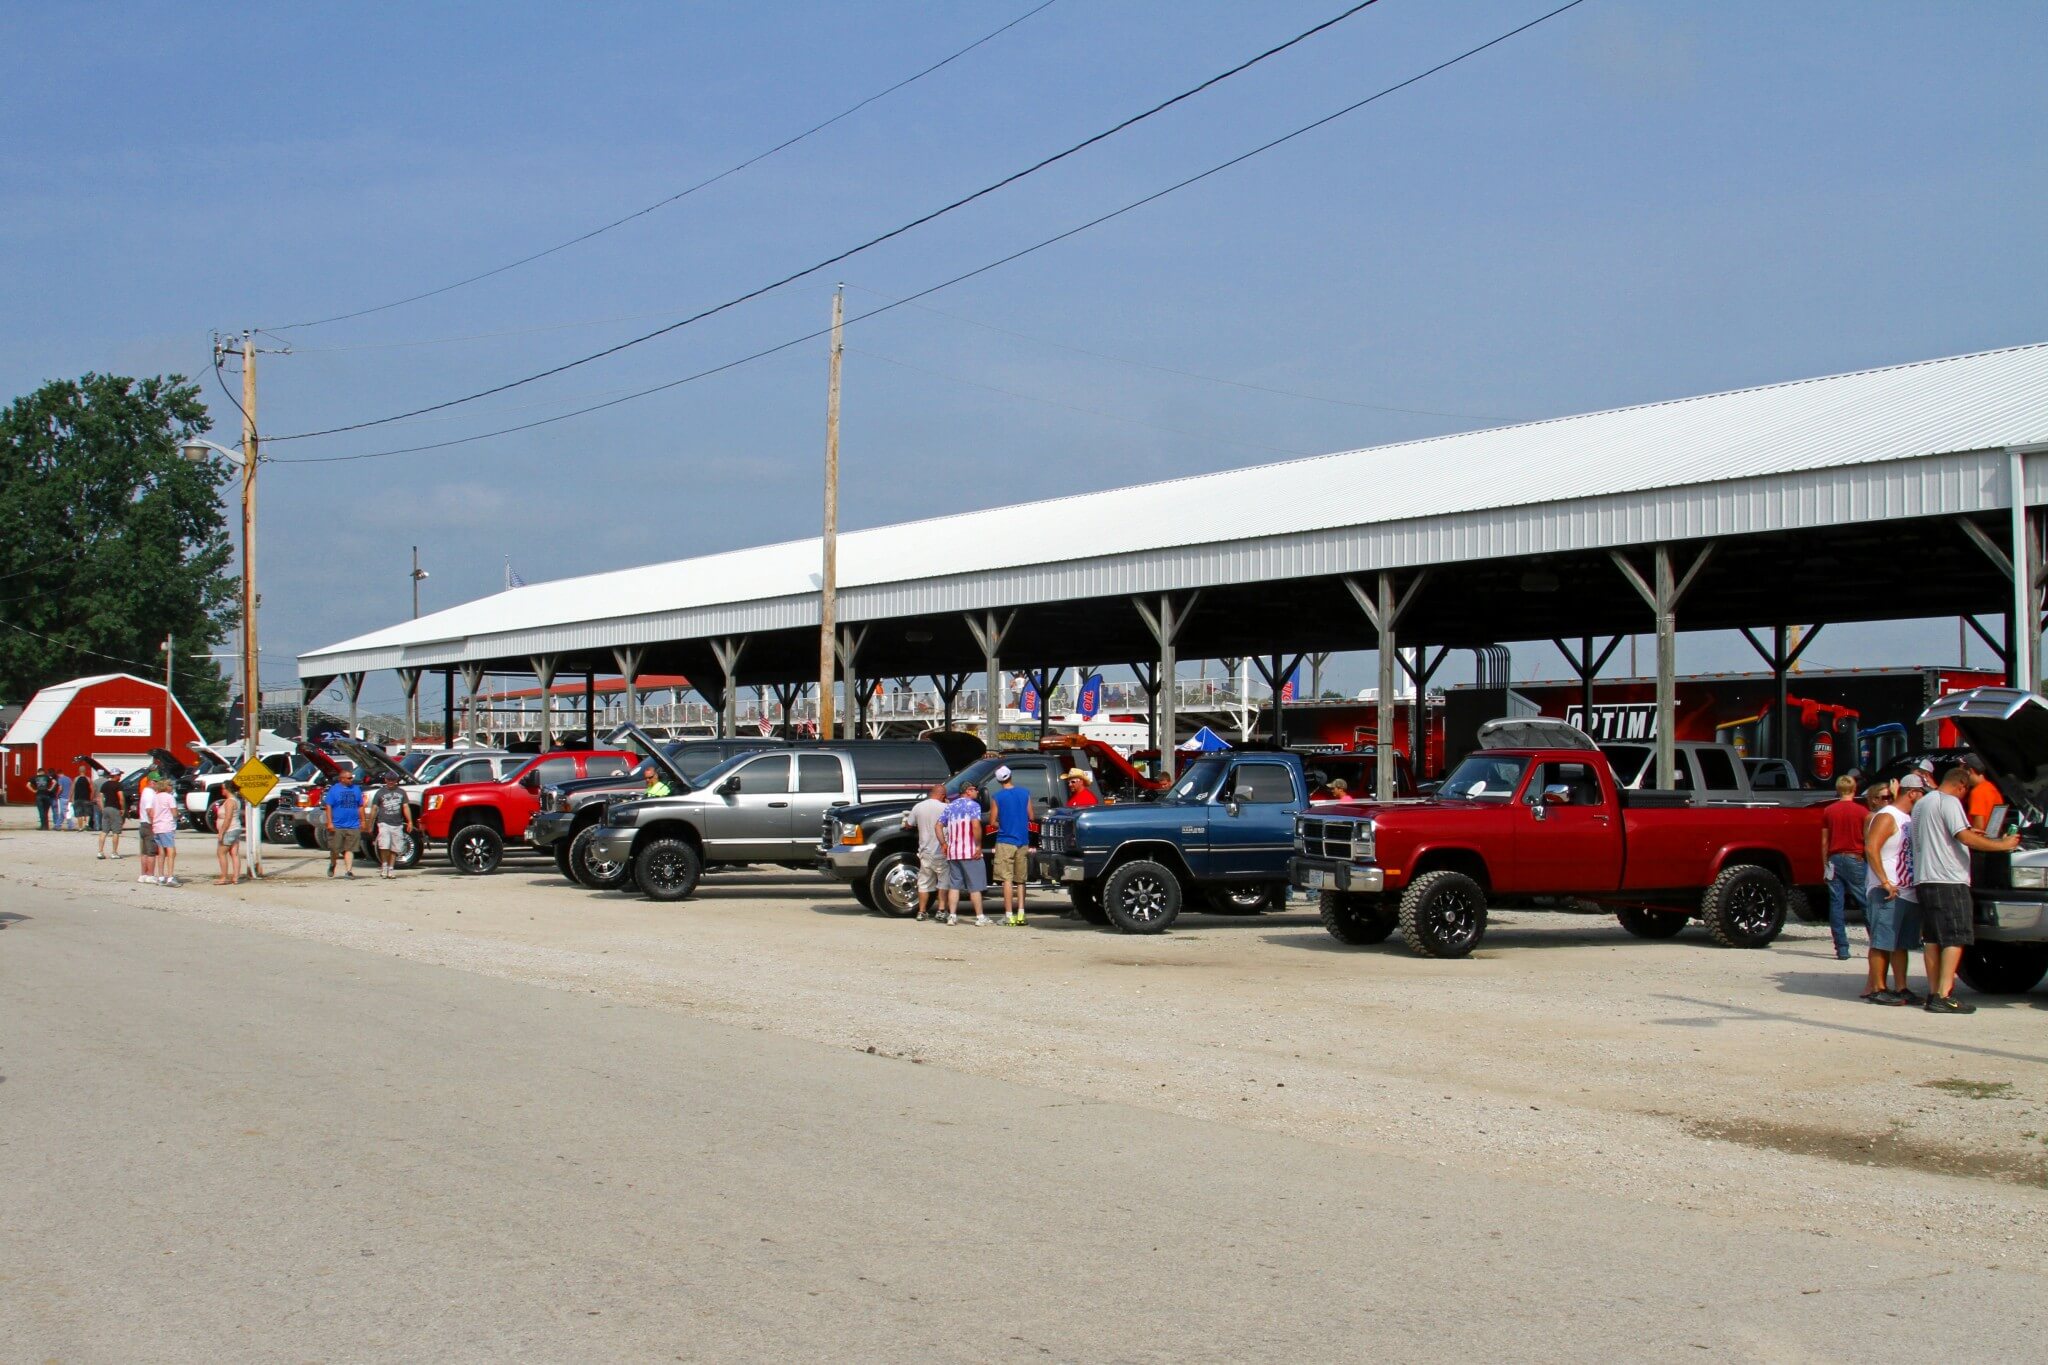 Friday and Saturday's Show-N-Shine competitors filled the covered pavilion and overflowed into the midway, giving spectators the opportunity to gawk at some beautiful trucks.